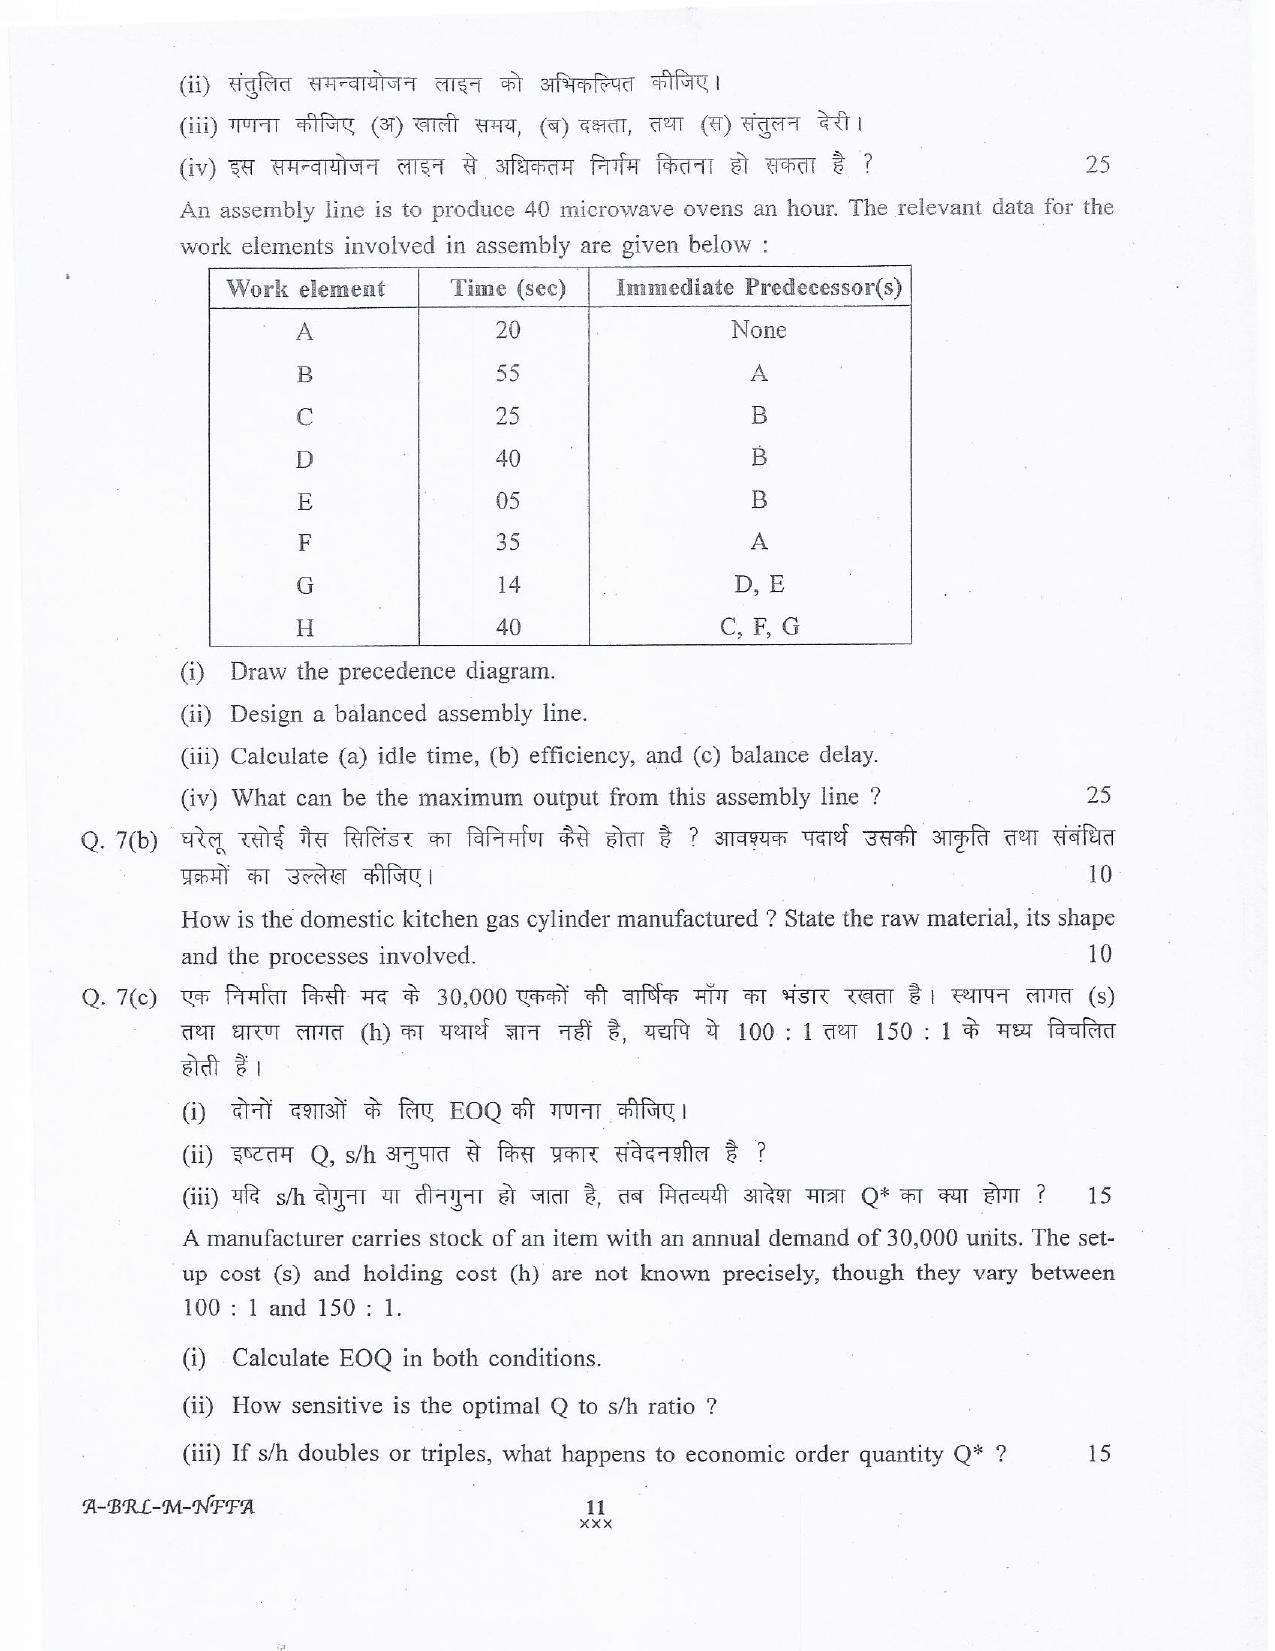 lakshadweep.gov.in Mechanical Engineering Question Papers - Page 11